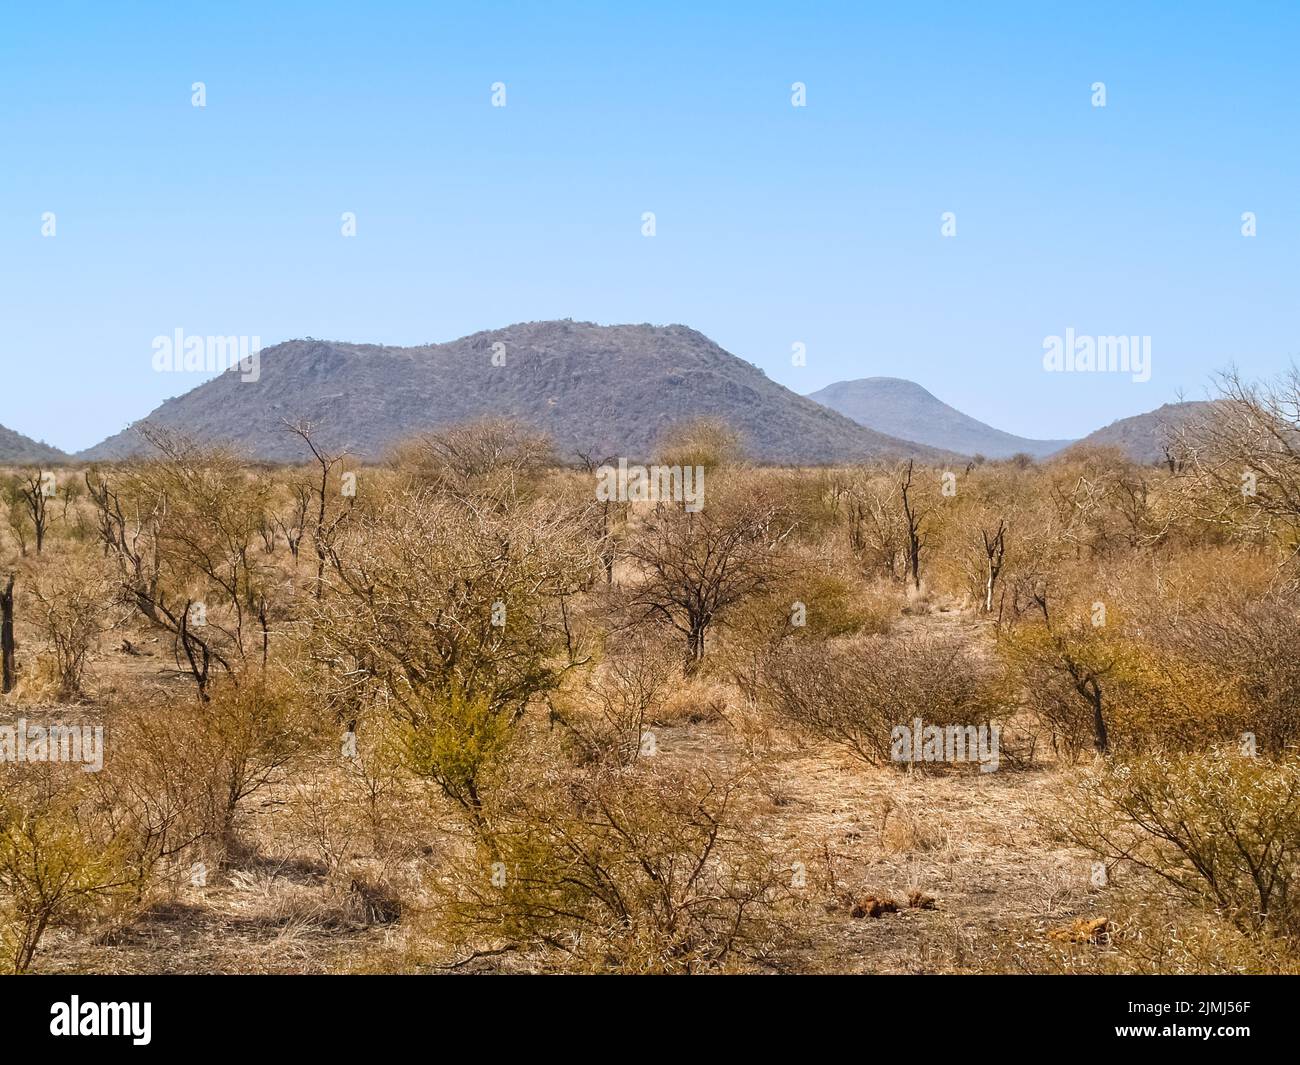 Low scrub across flat typical African landscape with distant hill. Stock Photo